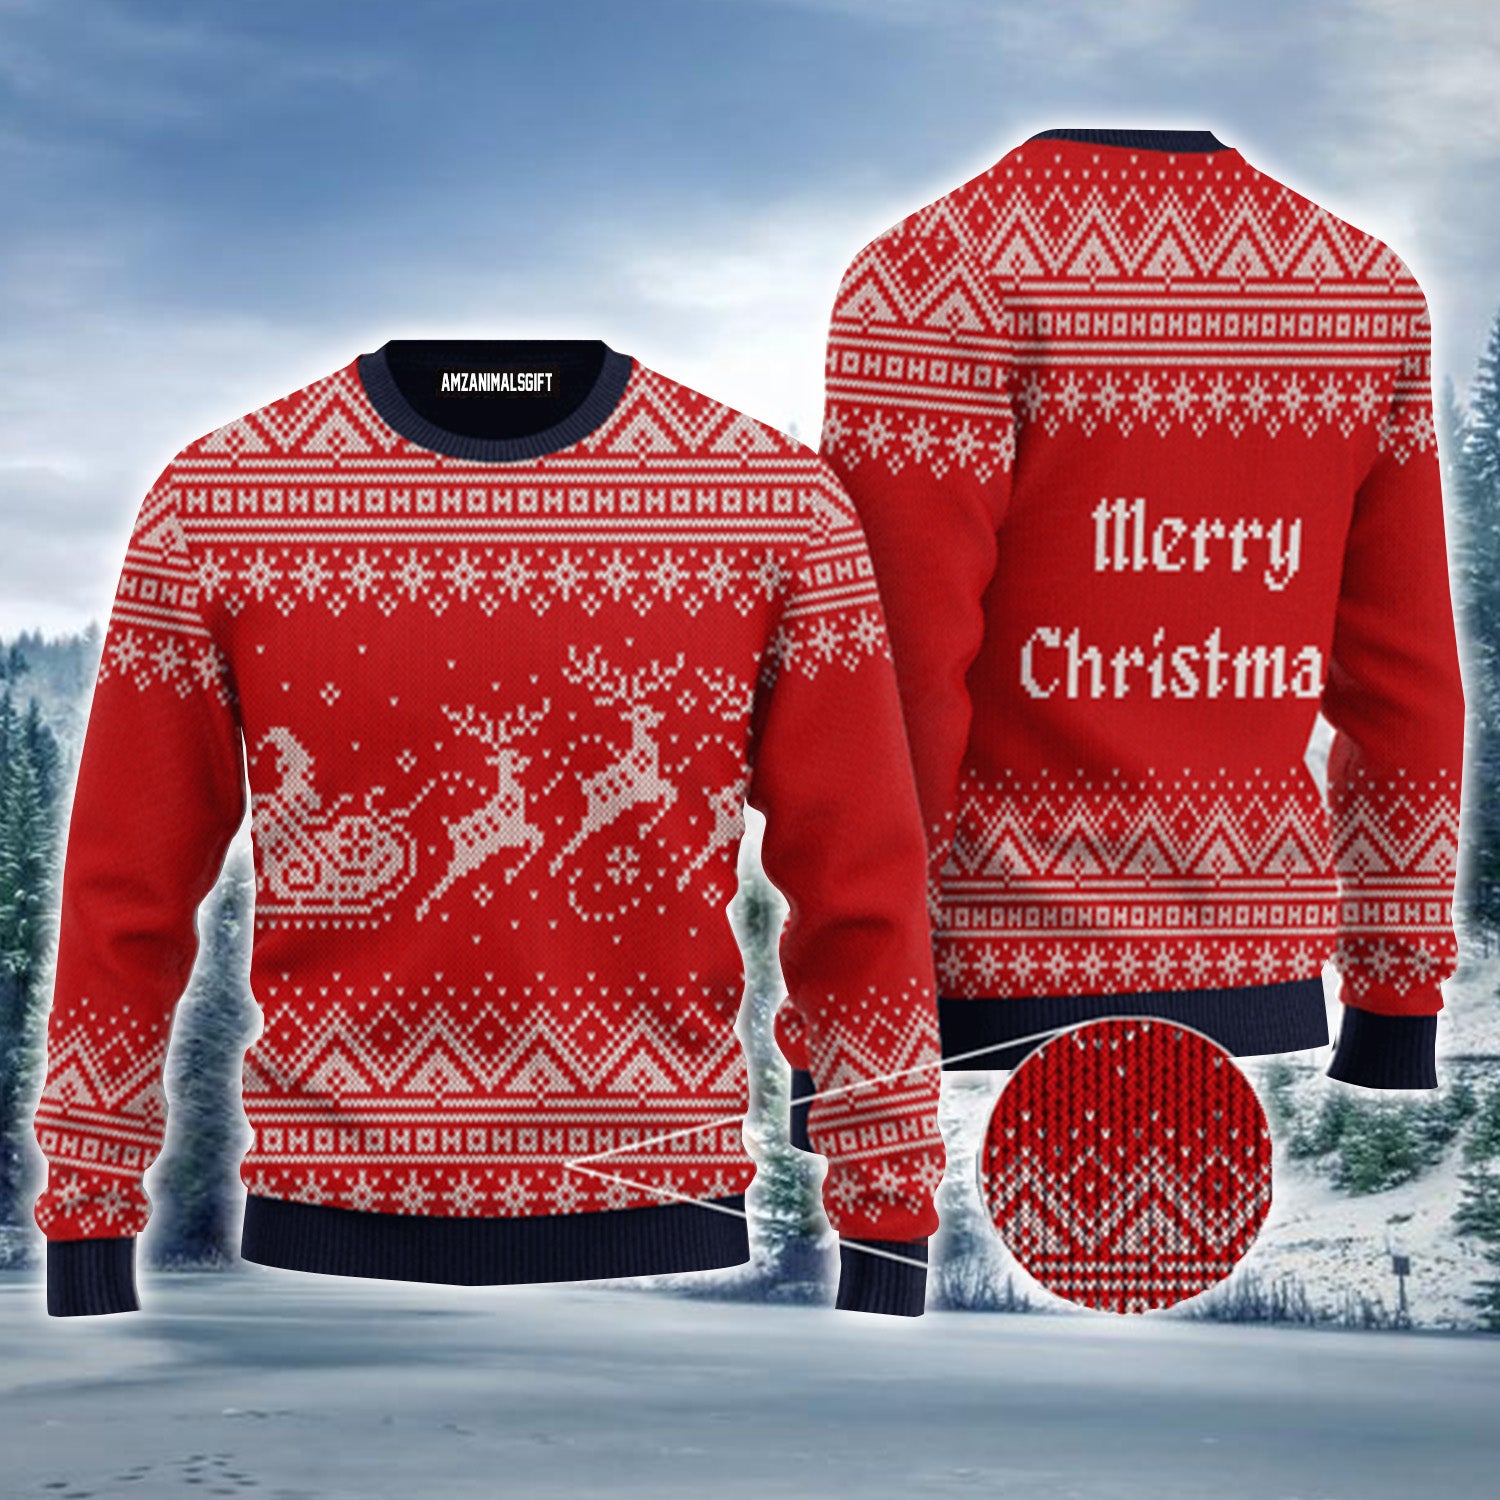 Red Christmas Santa Reindeer Wool Knitted Pattern Urly Sweater, Christmas Sweater For Men & Women - Perfect Gift For Christmas, New Year, Winter